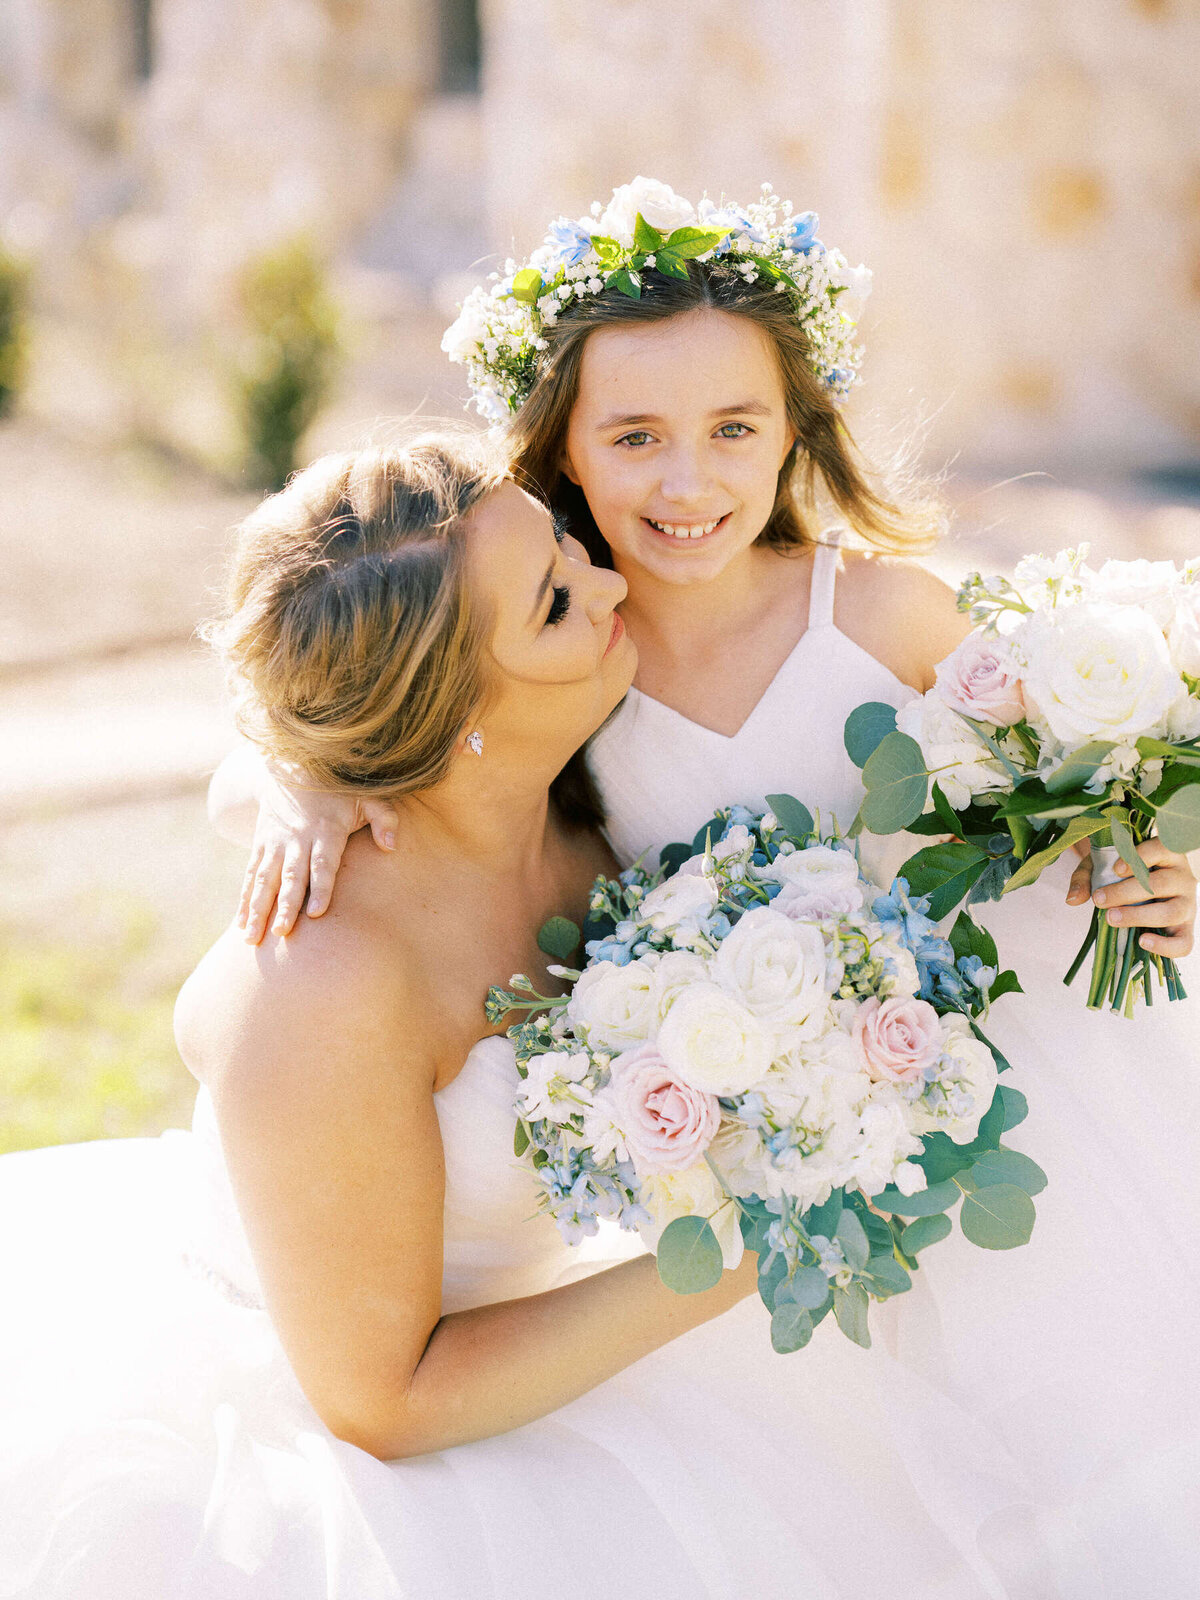 Junior bridesmaid with flower crown poses with bride at spring wedding in North Texas